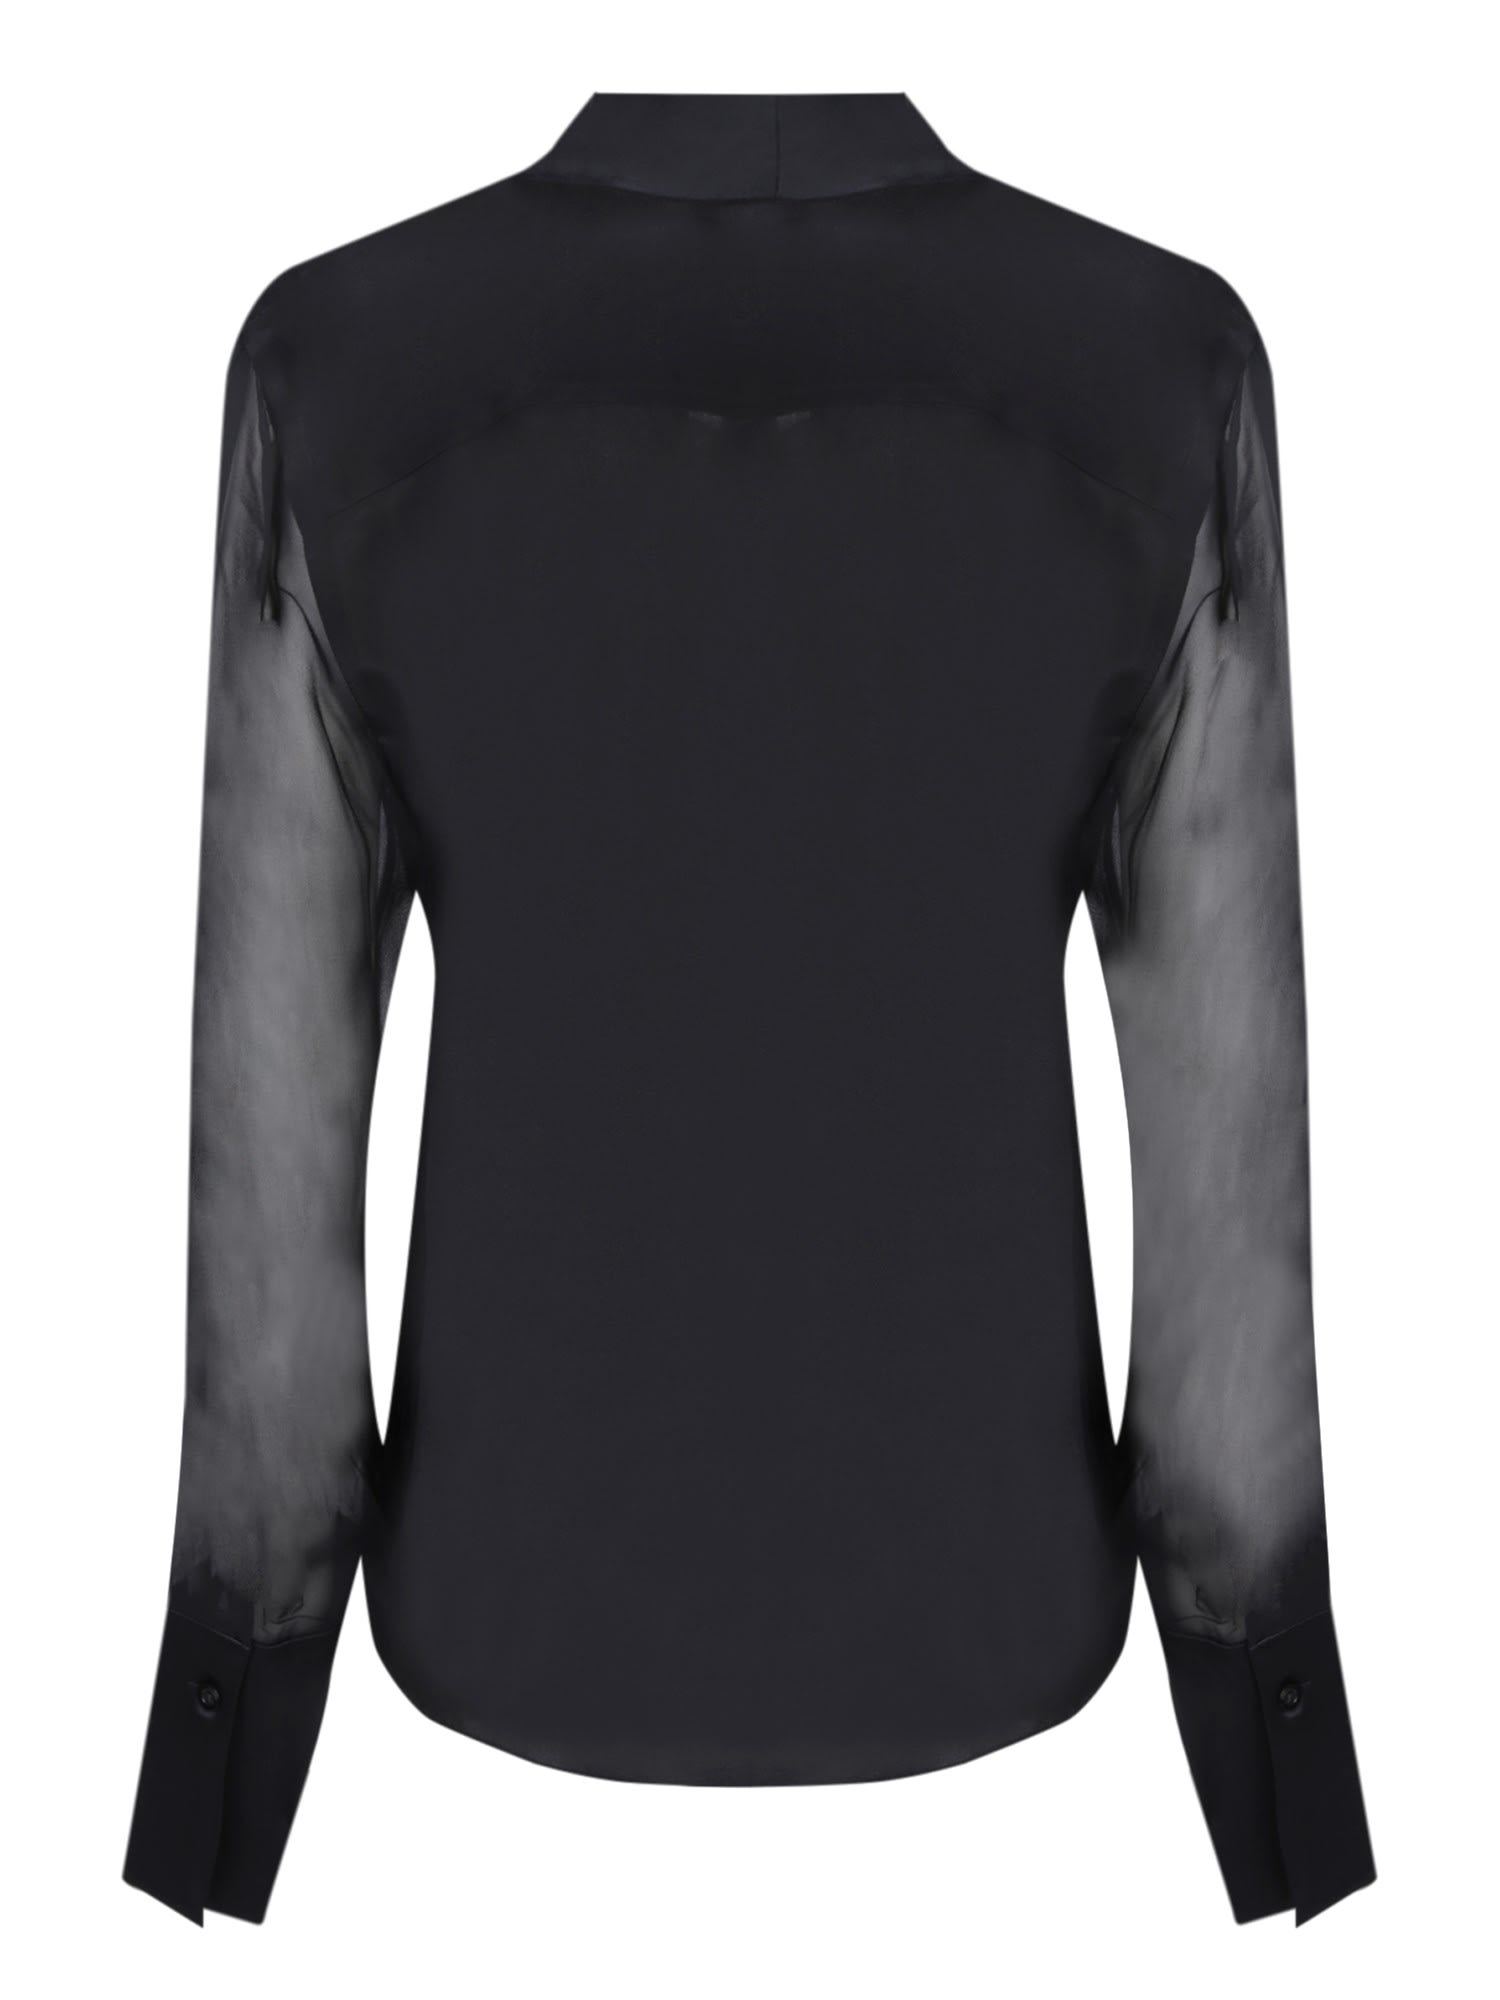 Shop Alice And Olivia Black Bow Tie Blouse